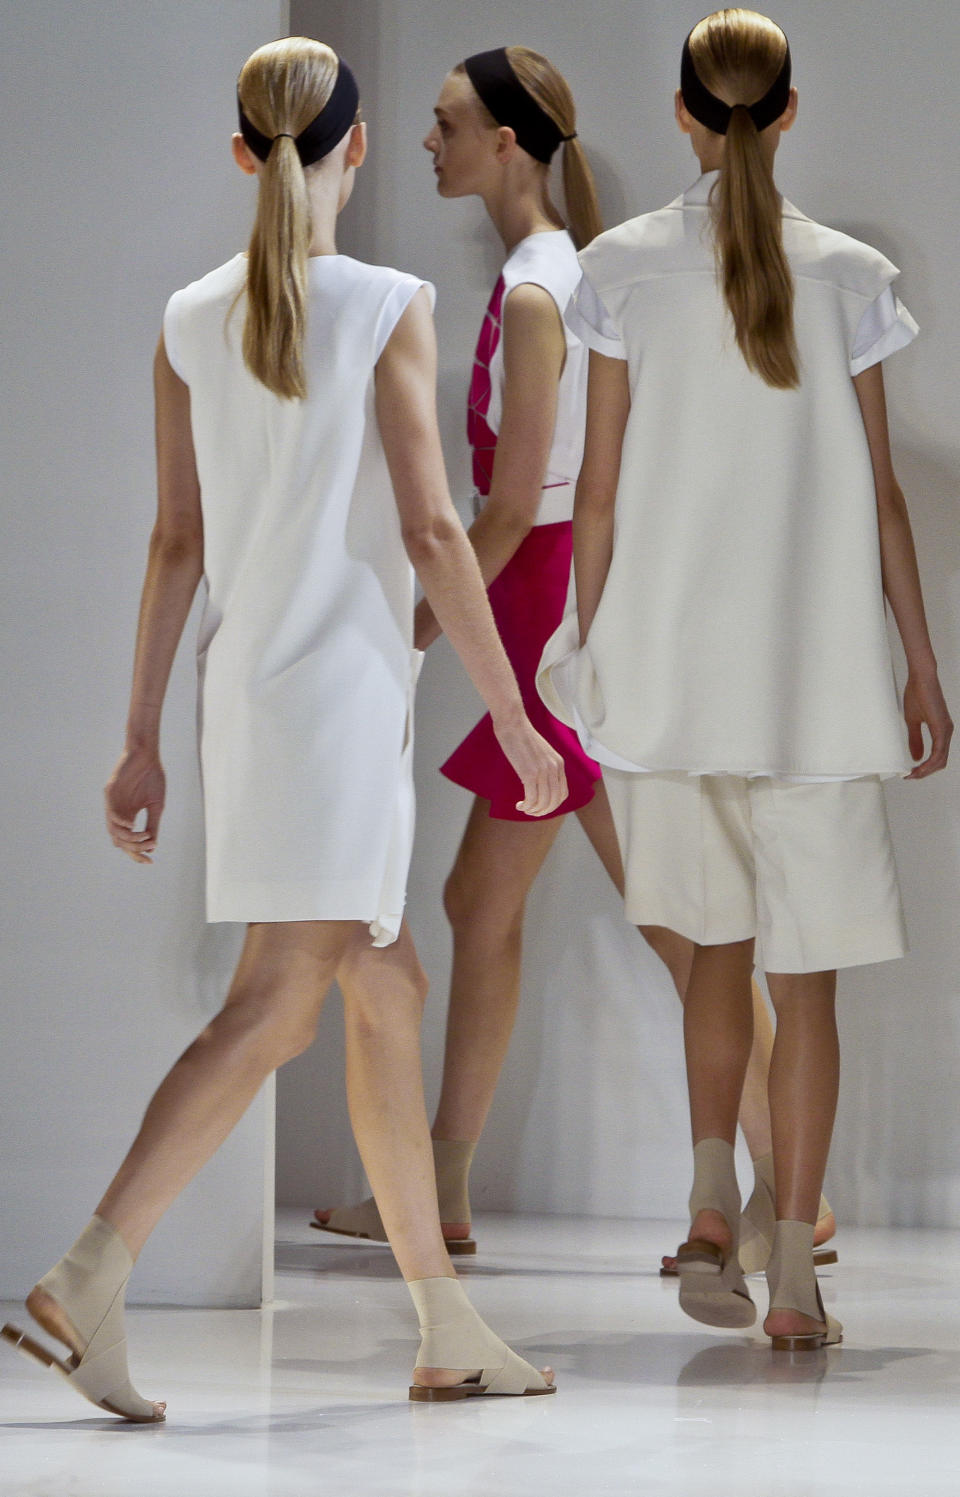 Fashion from the Victoria Beckham Spring 2014 collection is modeled on Sunday, Sept. 8, 2013 in New York. (AP Photo/Bebeto Matthews)